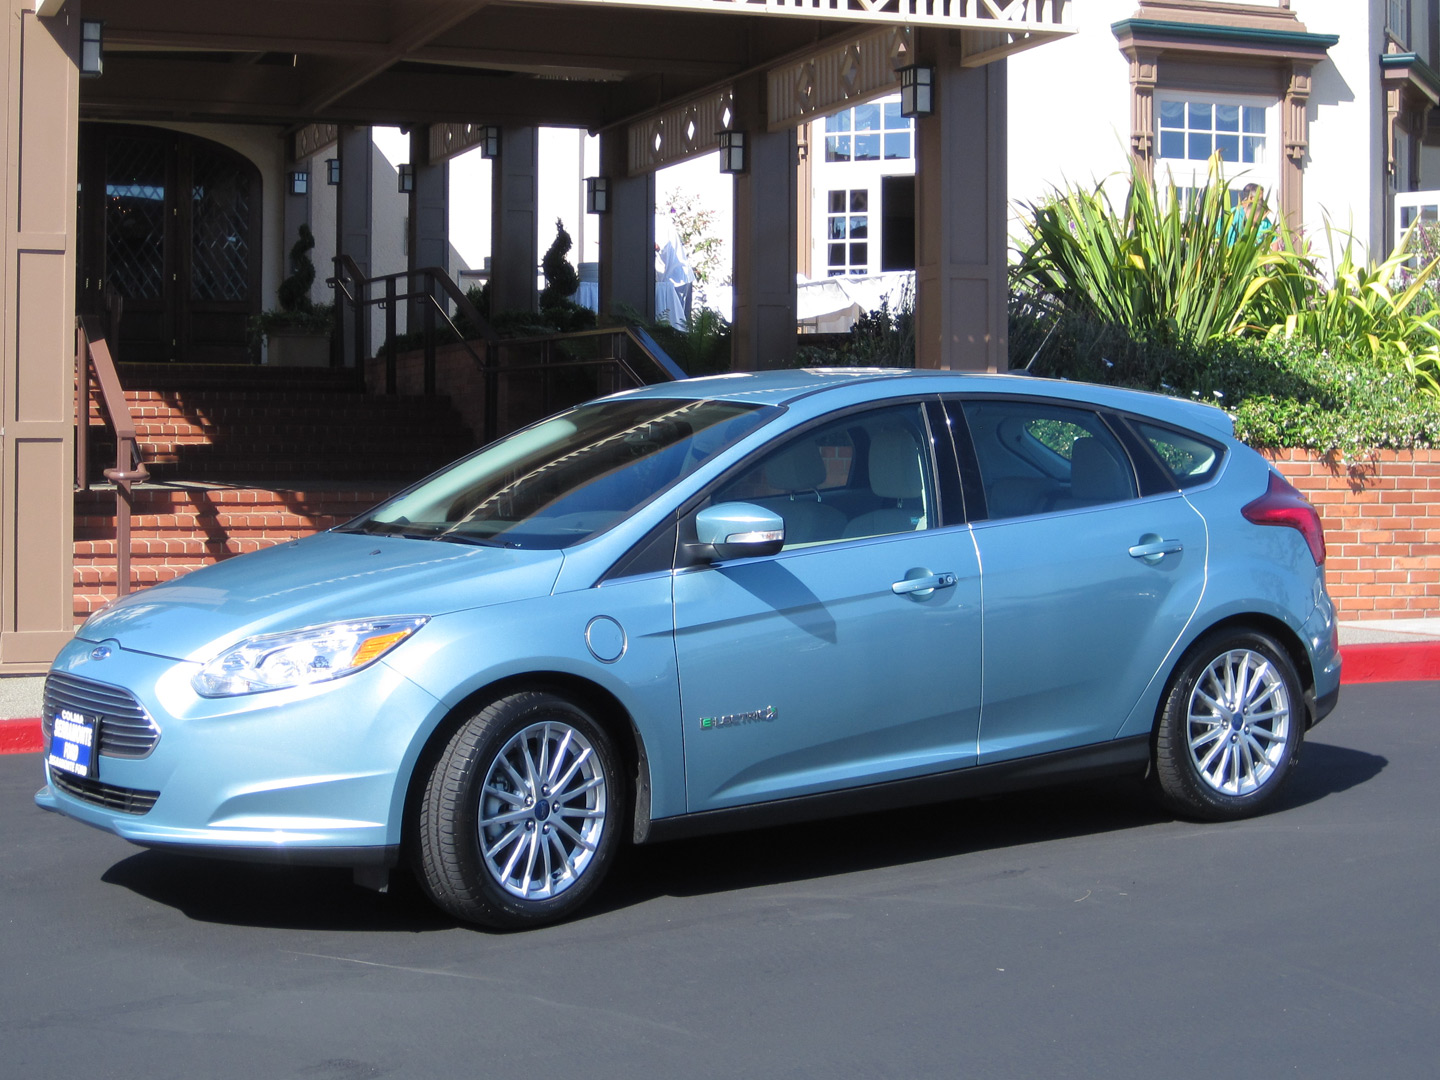 Connie in San Francisco, CA, bought a Ford Focus Electric